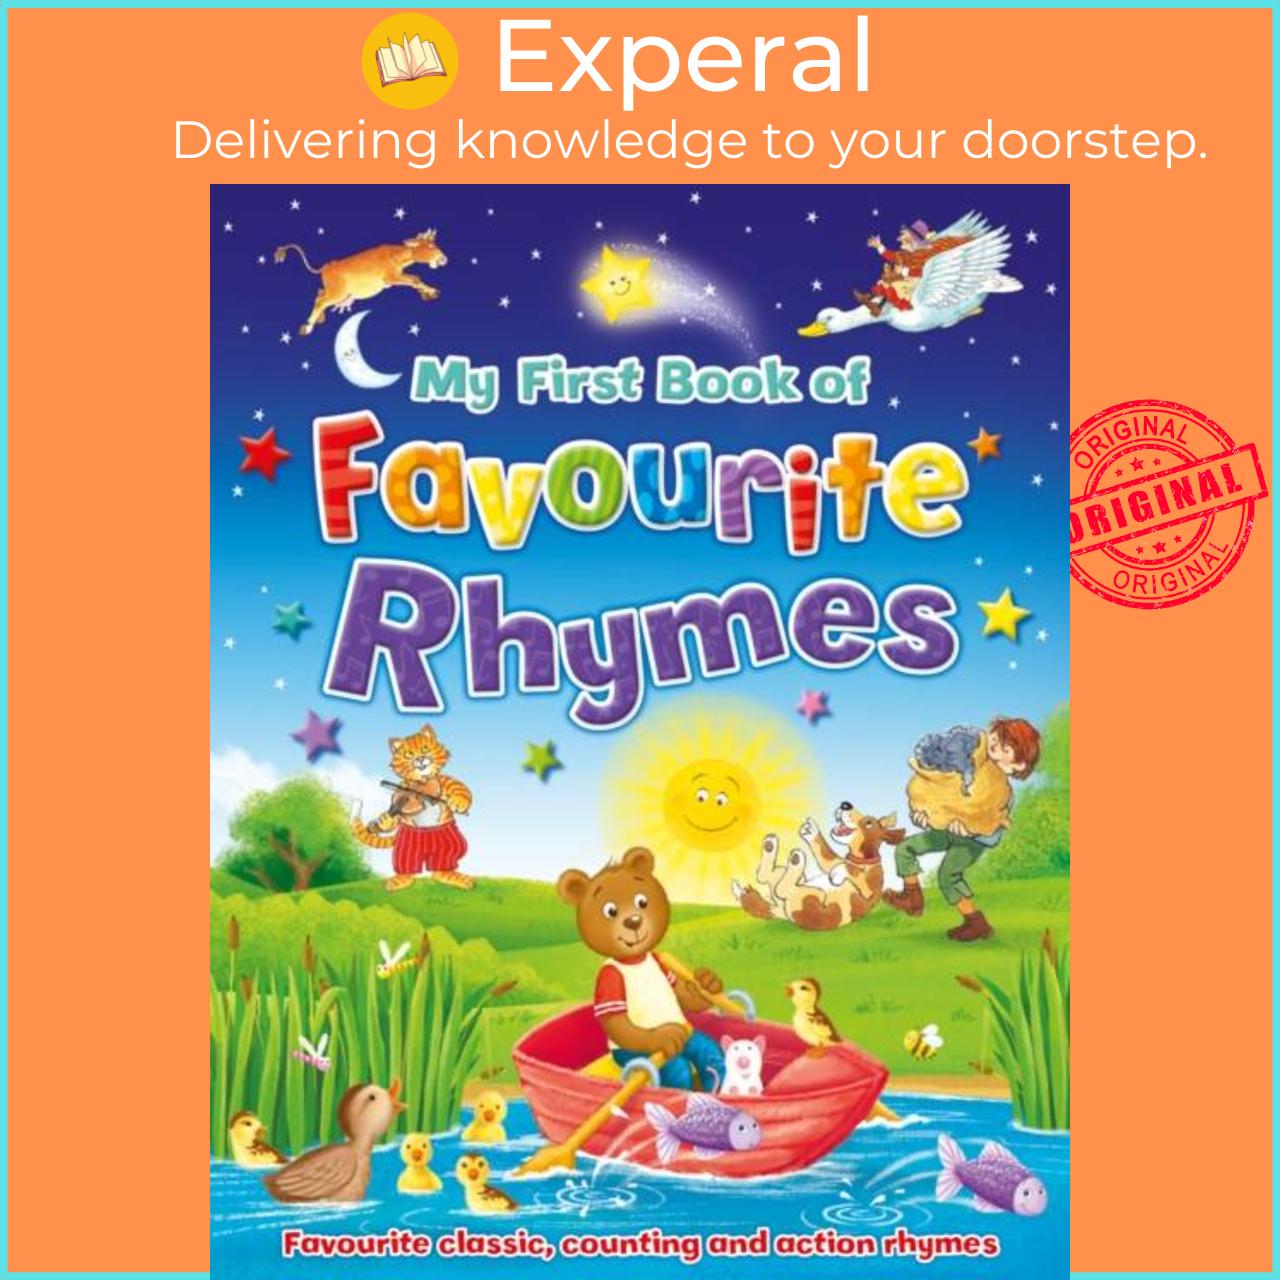 Sách - My First Book of Favourite Rhymes - Favourite classic, counting and action rhymes to  by  (UK edition, hardcover)